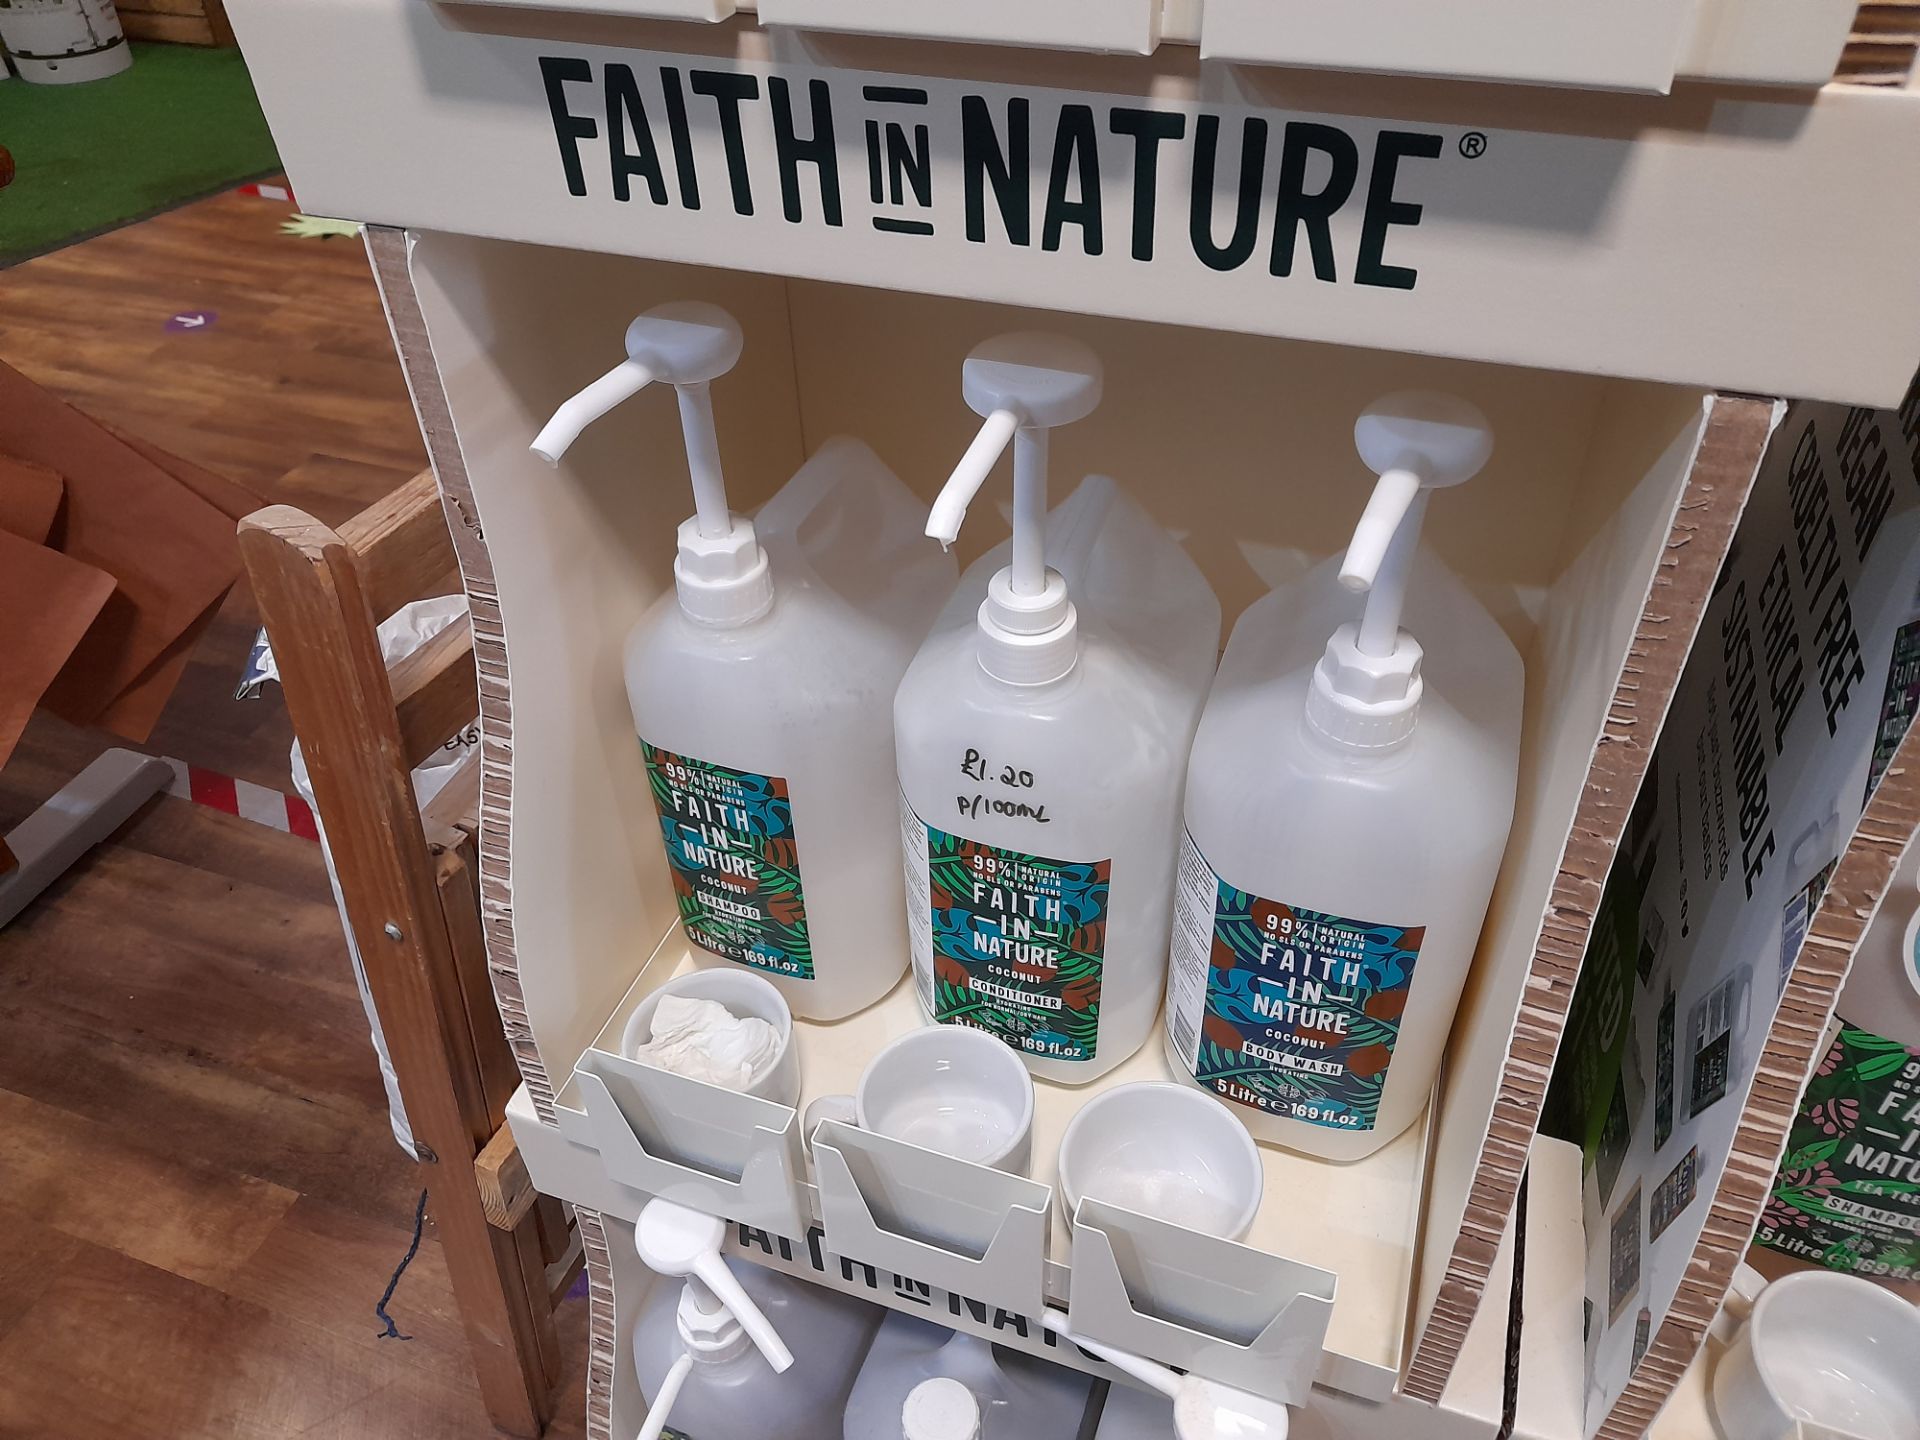 2x Faith in Nature Display Stands with 19x part opened Faith in Nature shampoos, conditioners, - Image 4 of 7